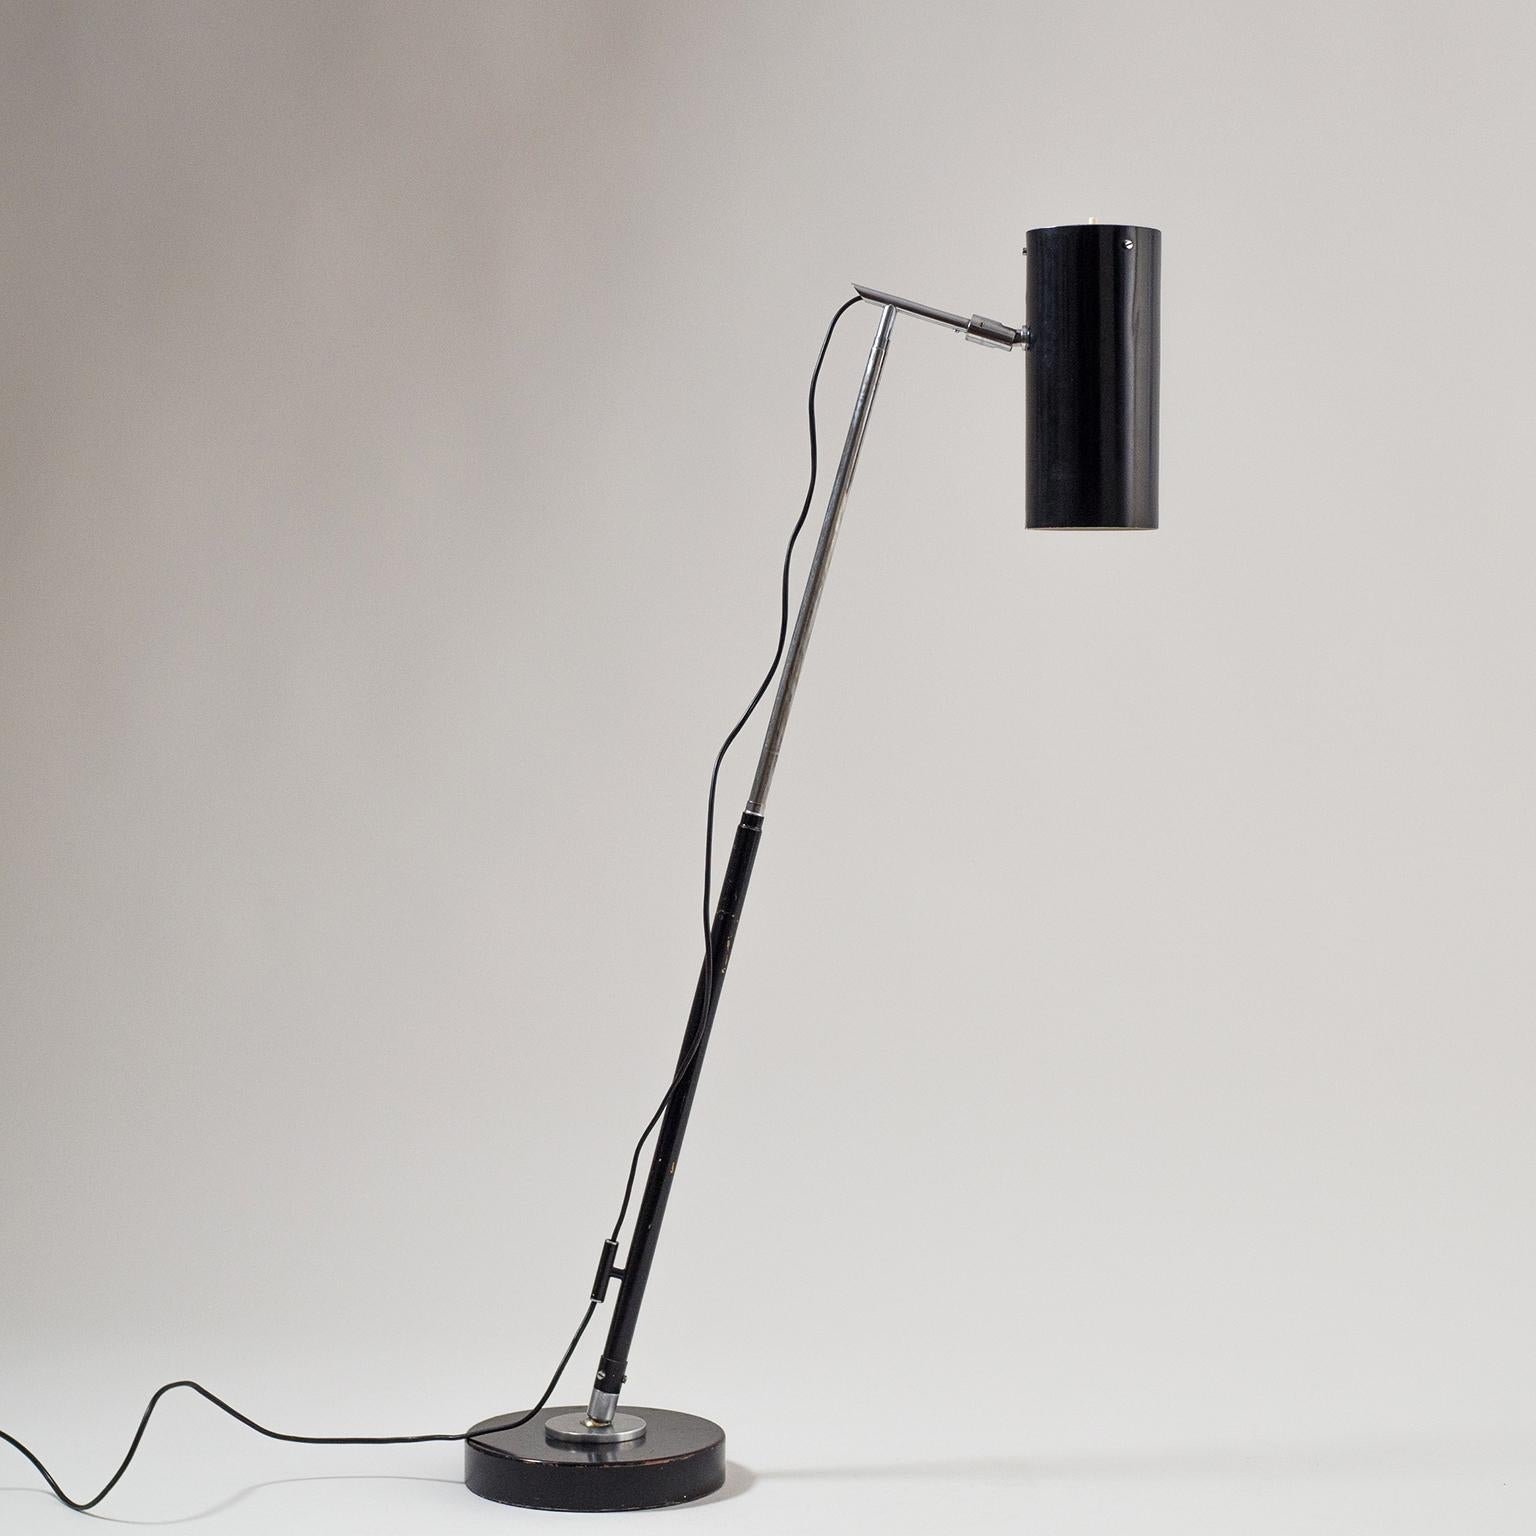 Rare model 201 telescopic floor and table lamp designed by Angelo Ostuni and Renato Forti for O-Luce, circa 1950. This version is in black with nickelled hardware, a cast steel base and a rare cylindrical shade with light switch on top. The